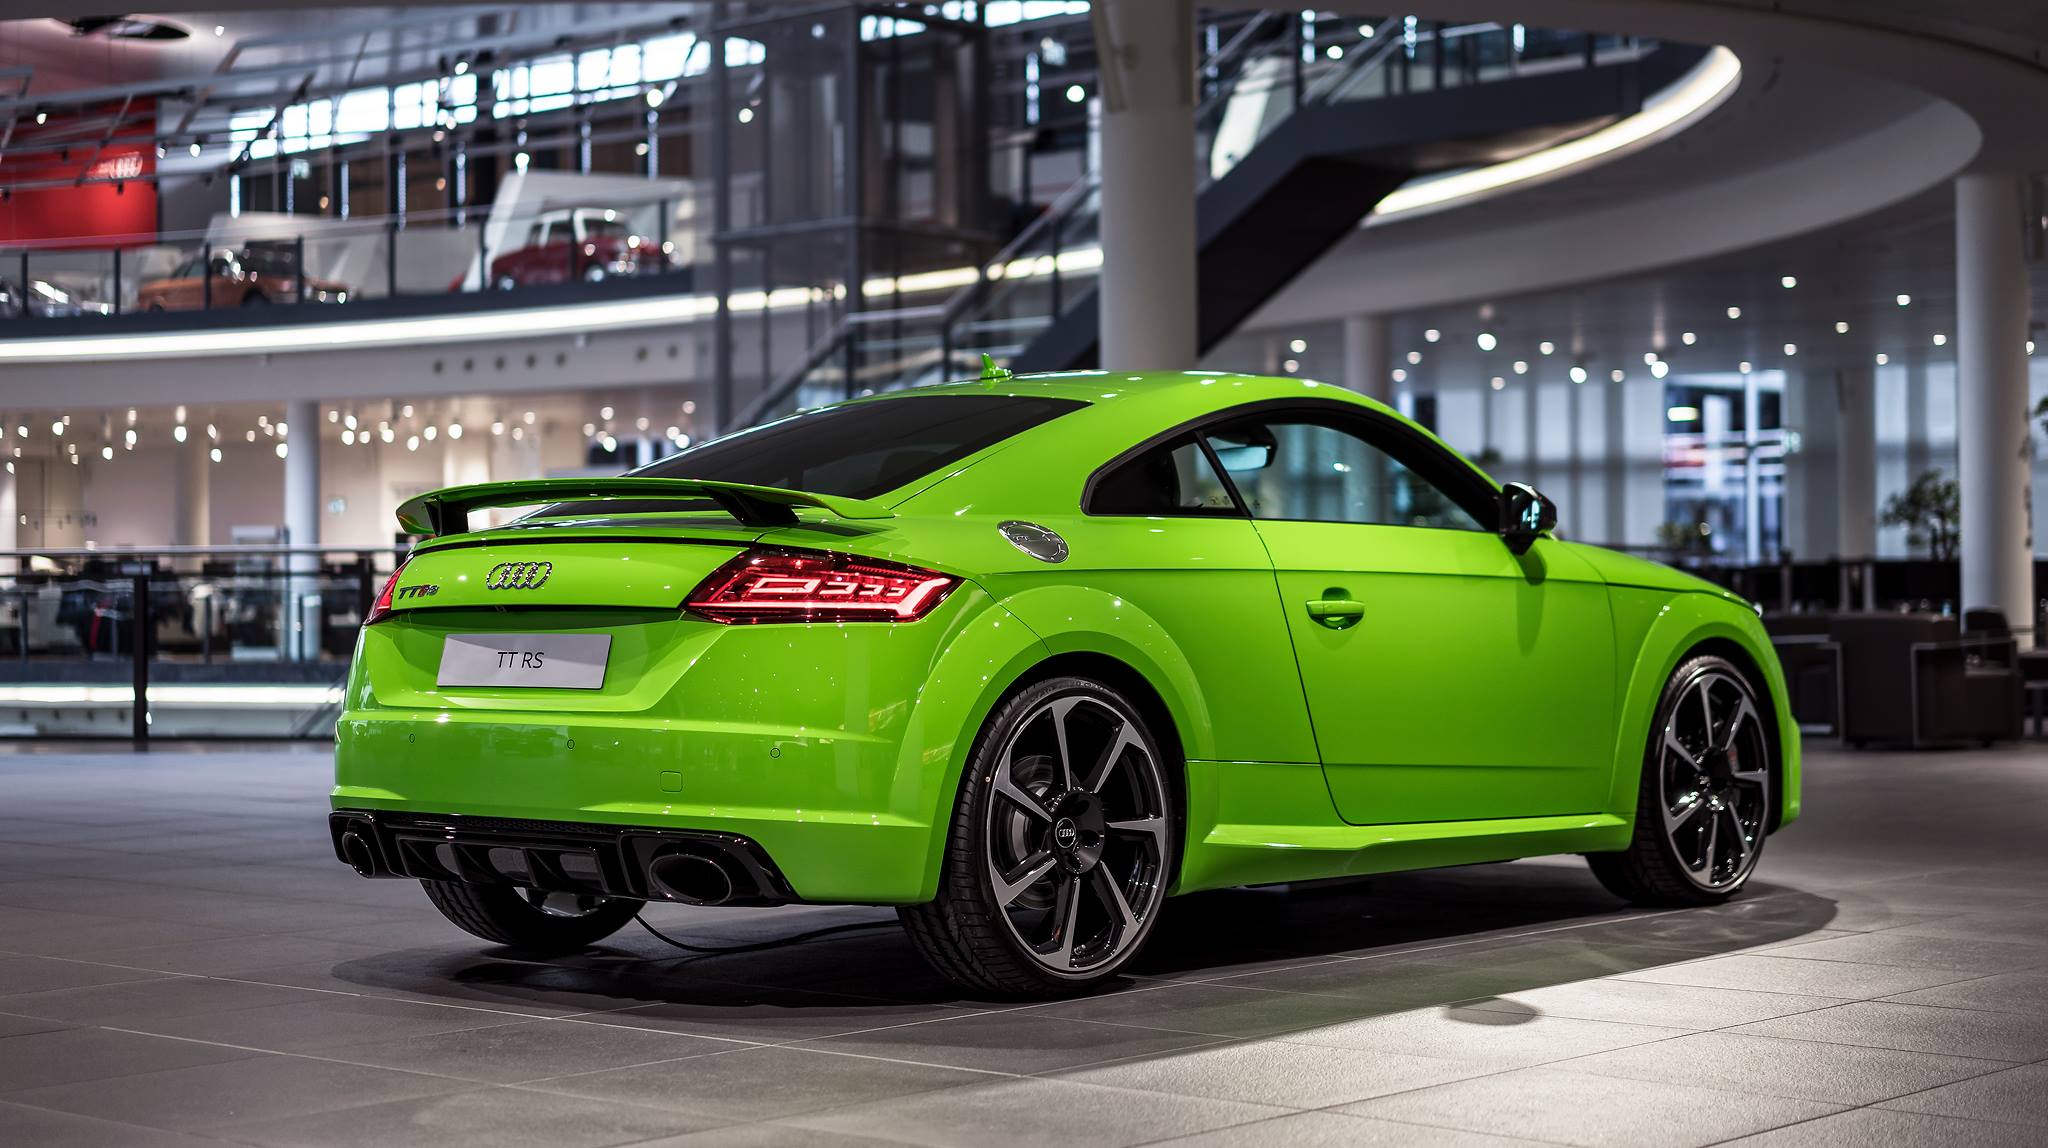 2017-audi-tt-rs-in-lime-green-looks-like-a-tiny-exotic-car_5